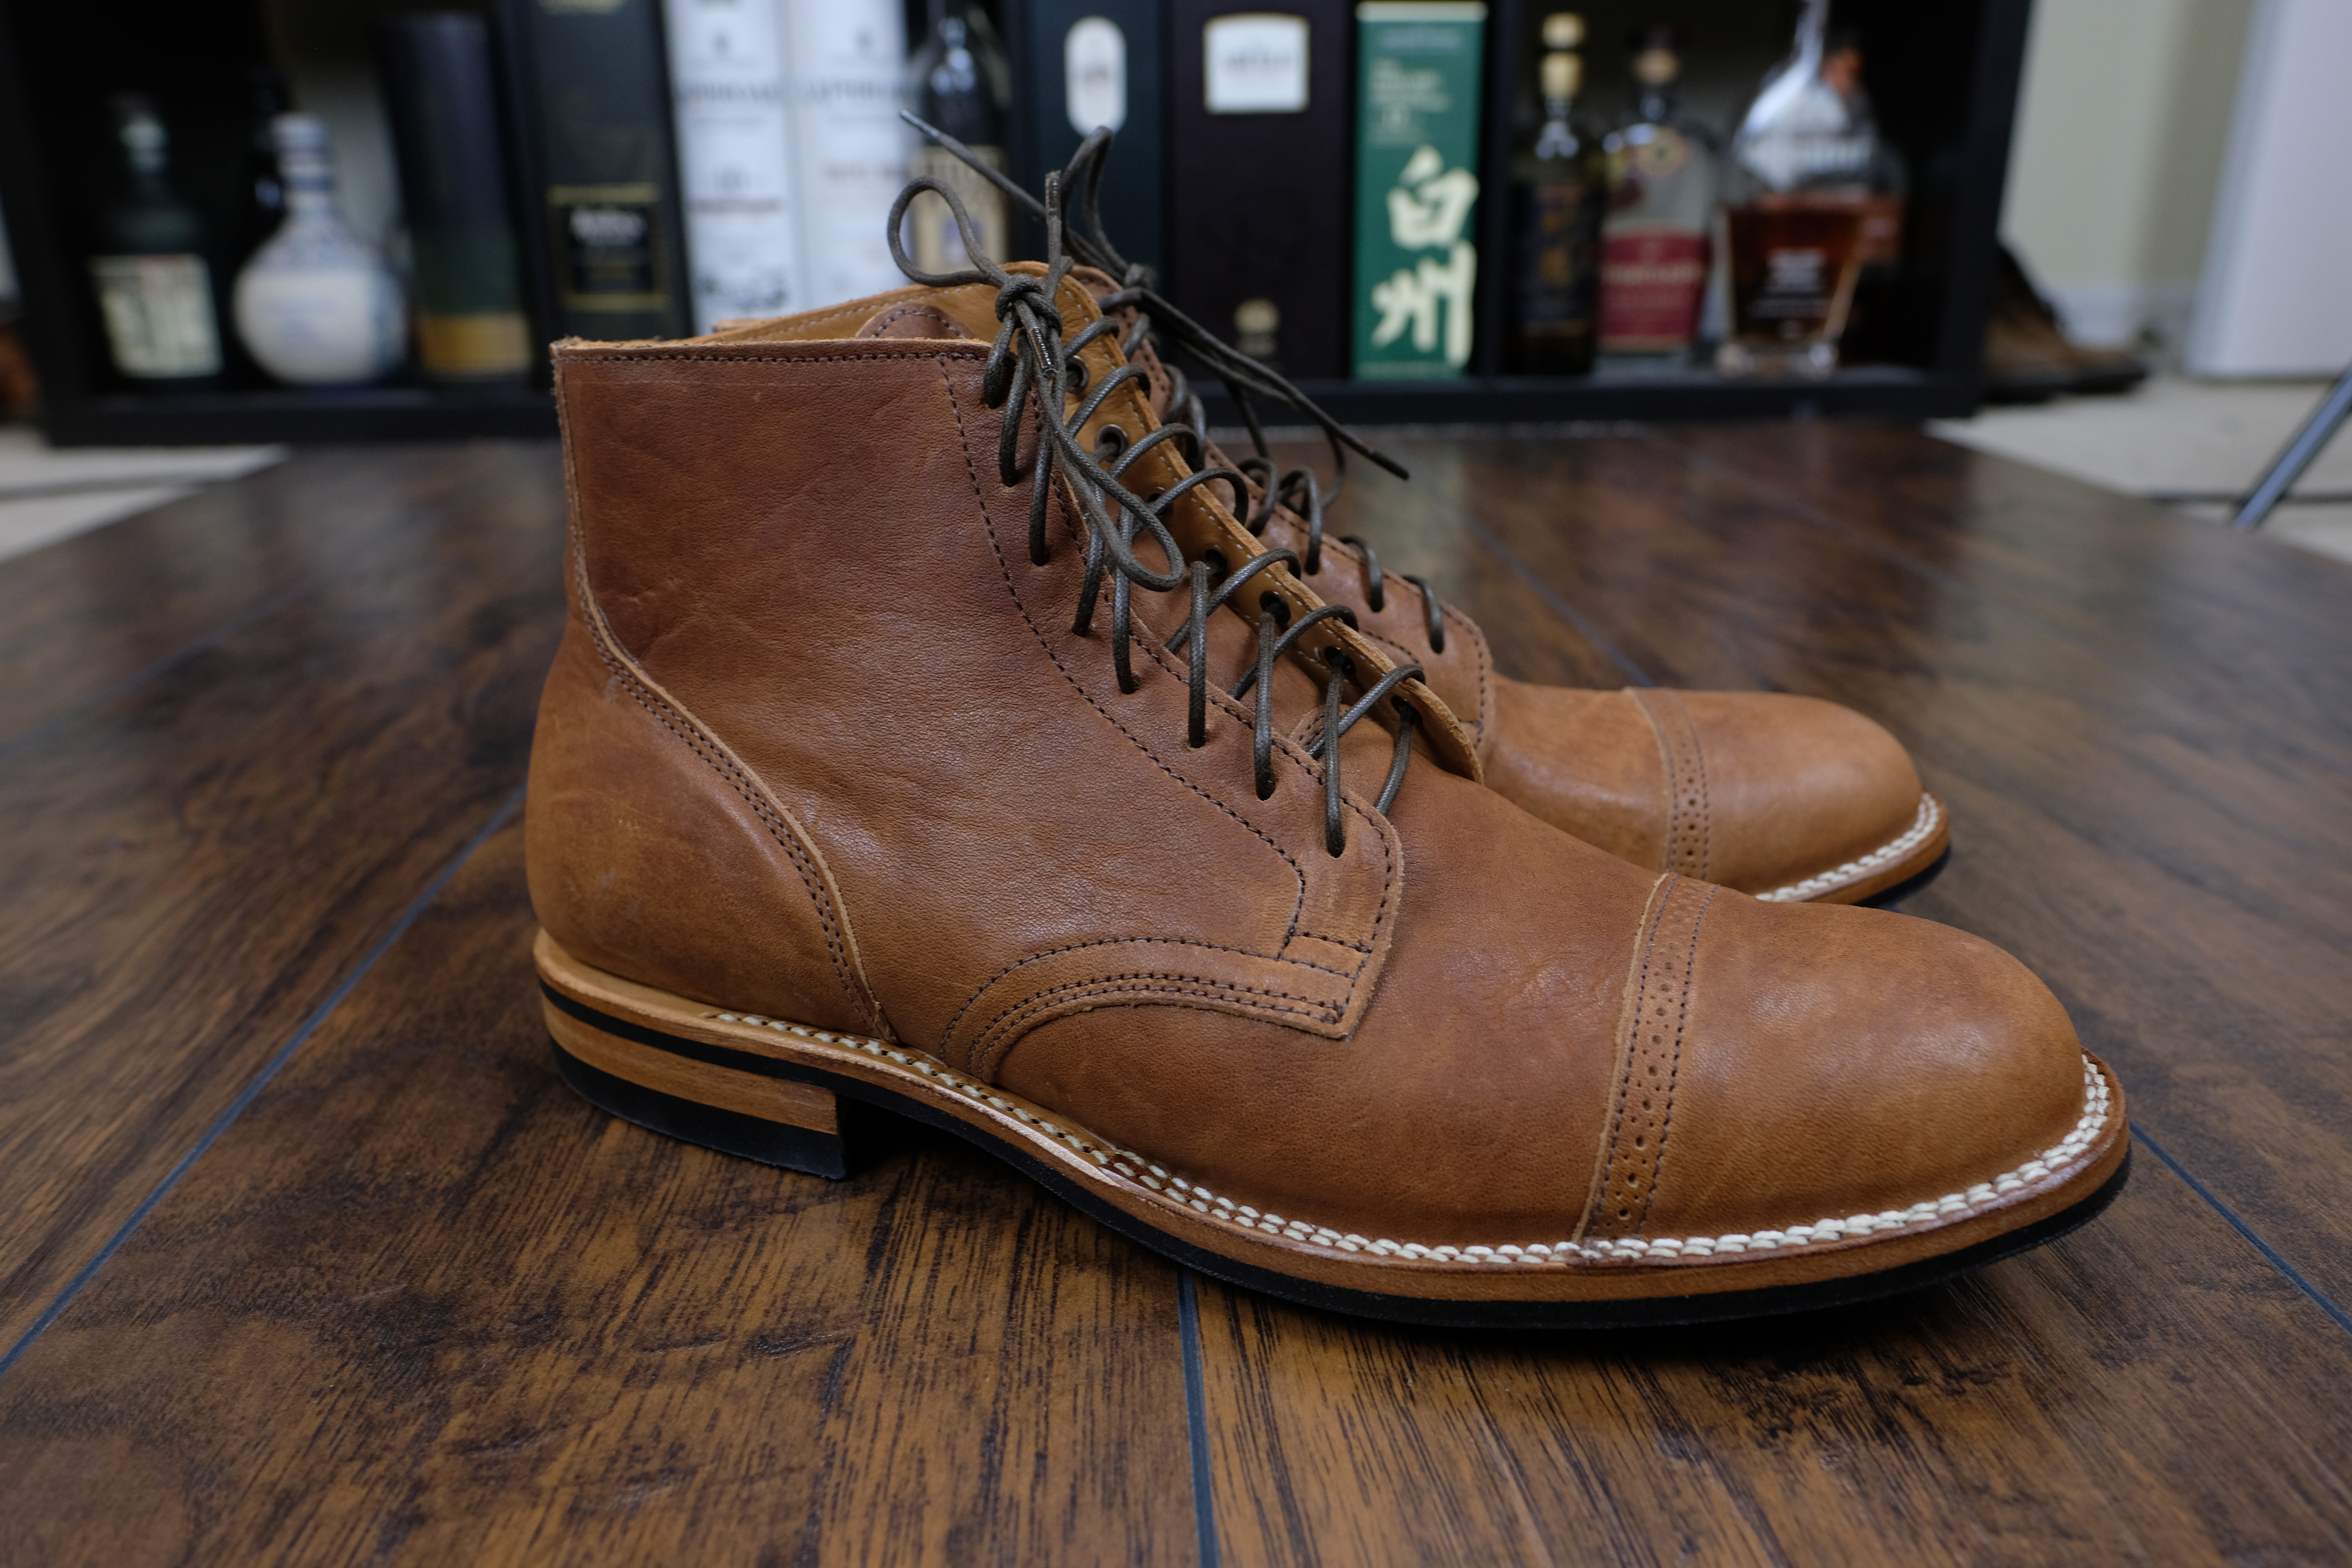 Viberg Service Boot Review – Almost 